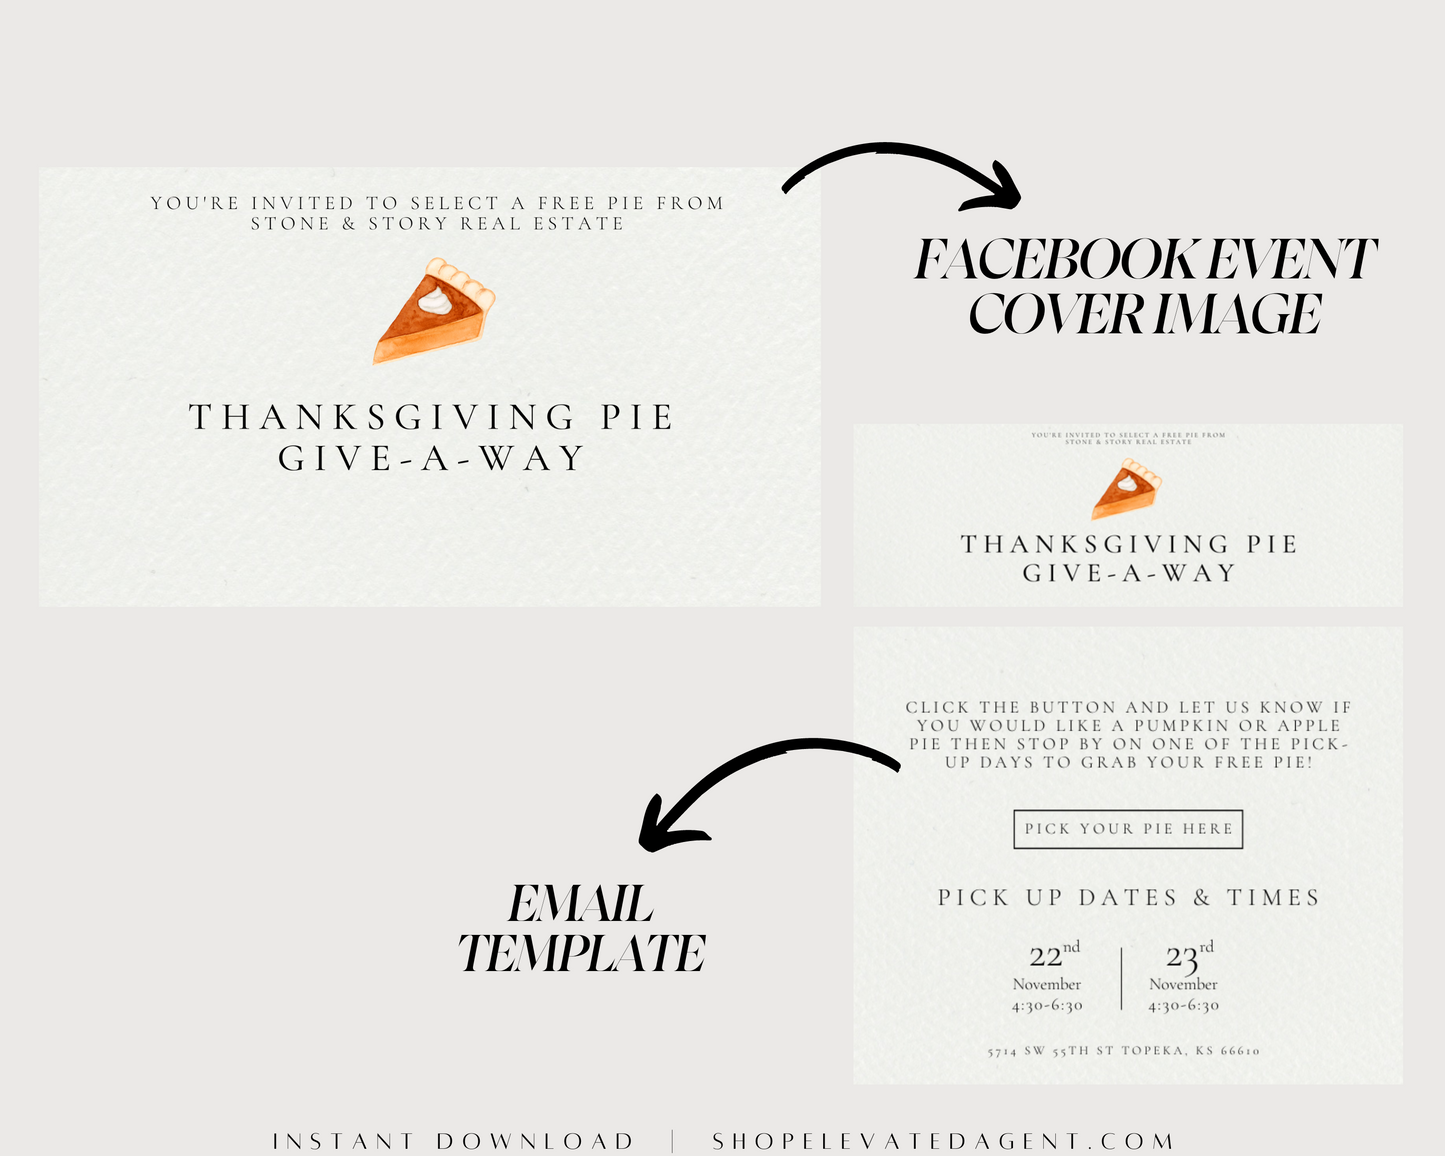 Real Estate Referral Event - Thanksgiving Pie Give-A-Way